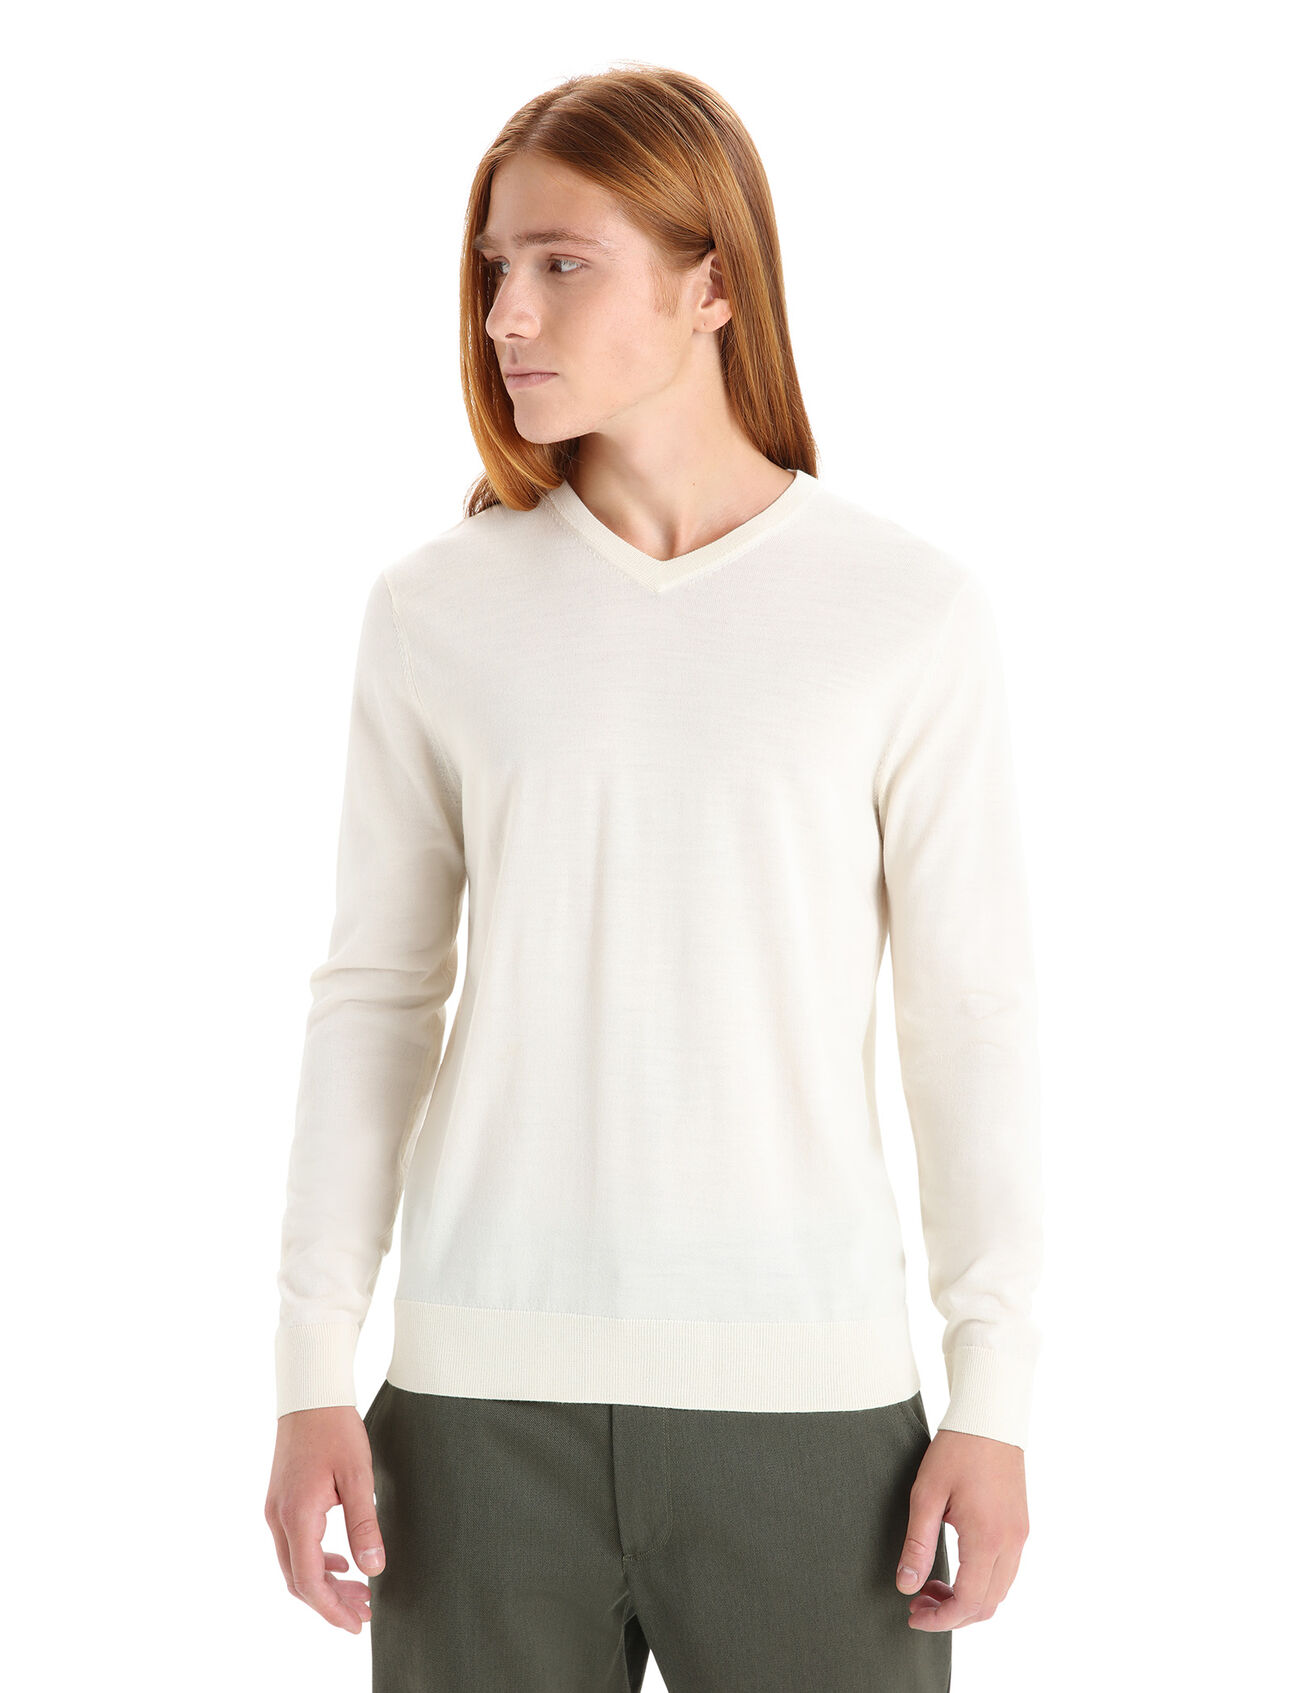 Mens Merino Wilcox Long Sleeve V Neck Sweater A classic everyday sweater made with ultra-fine gauge merino wool for unparalleled softness, the Wilcox Long Sleeve V Neck Sweater is perfect for days when you need a light extra layer.